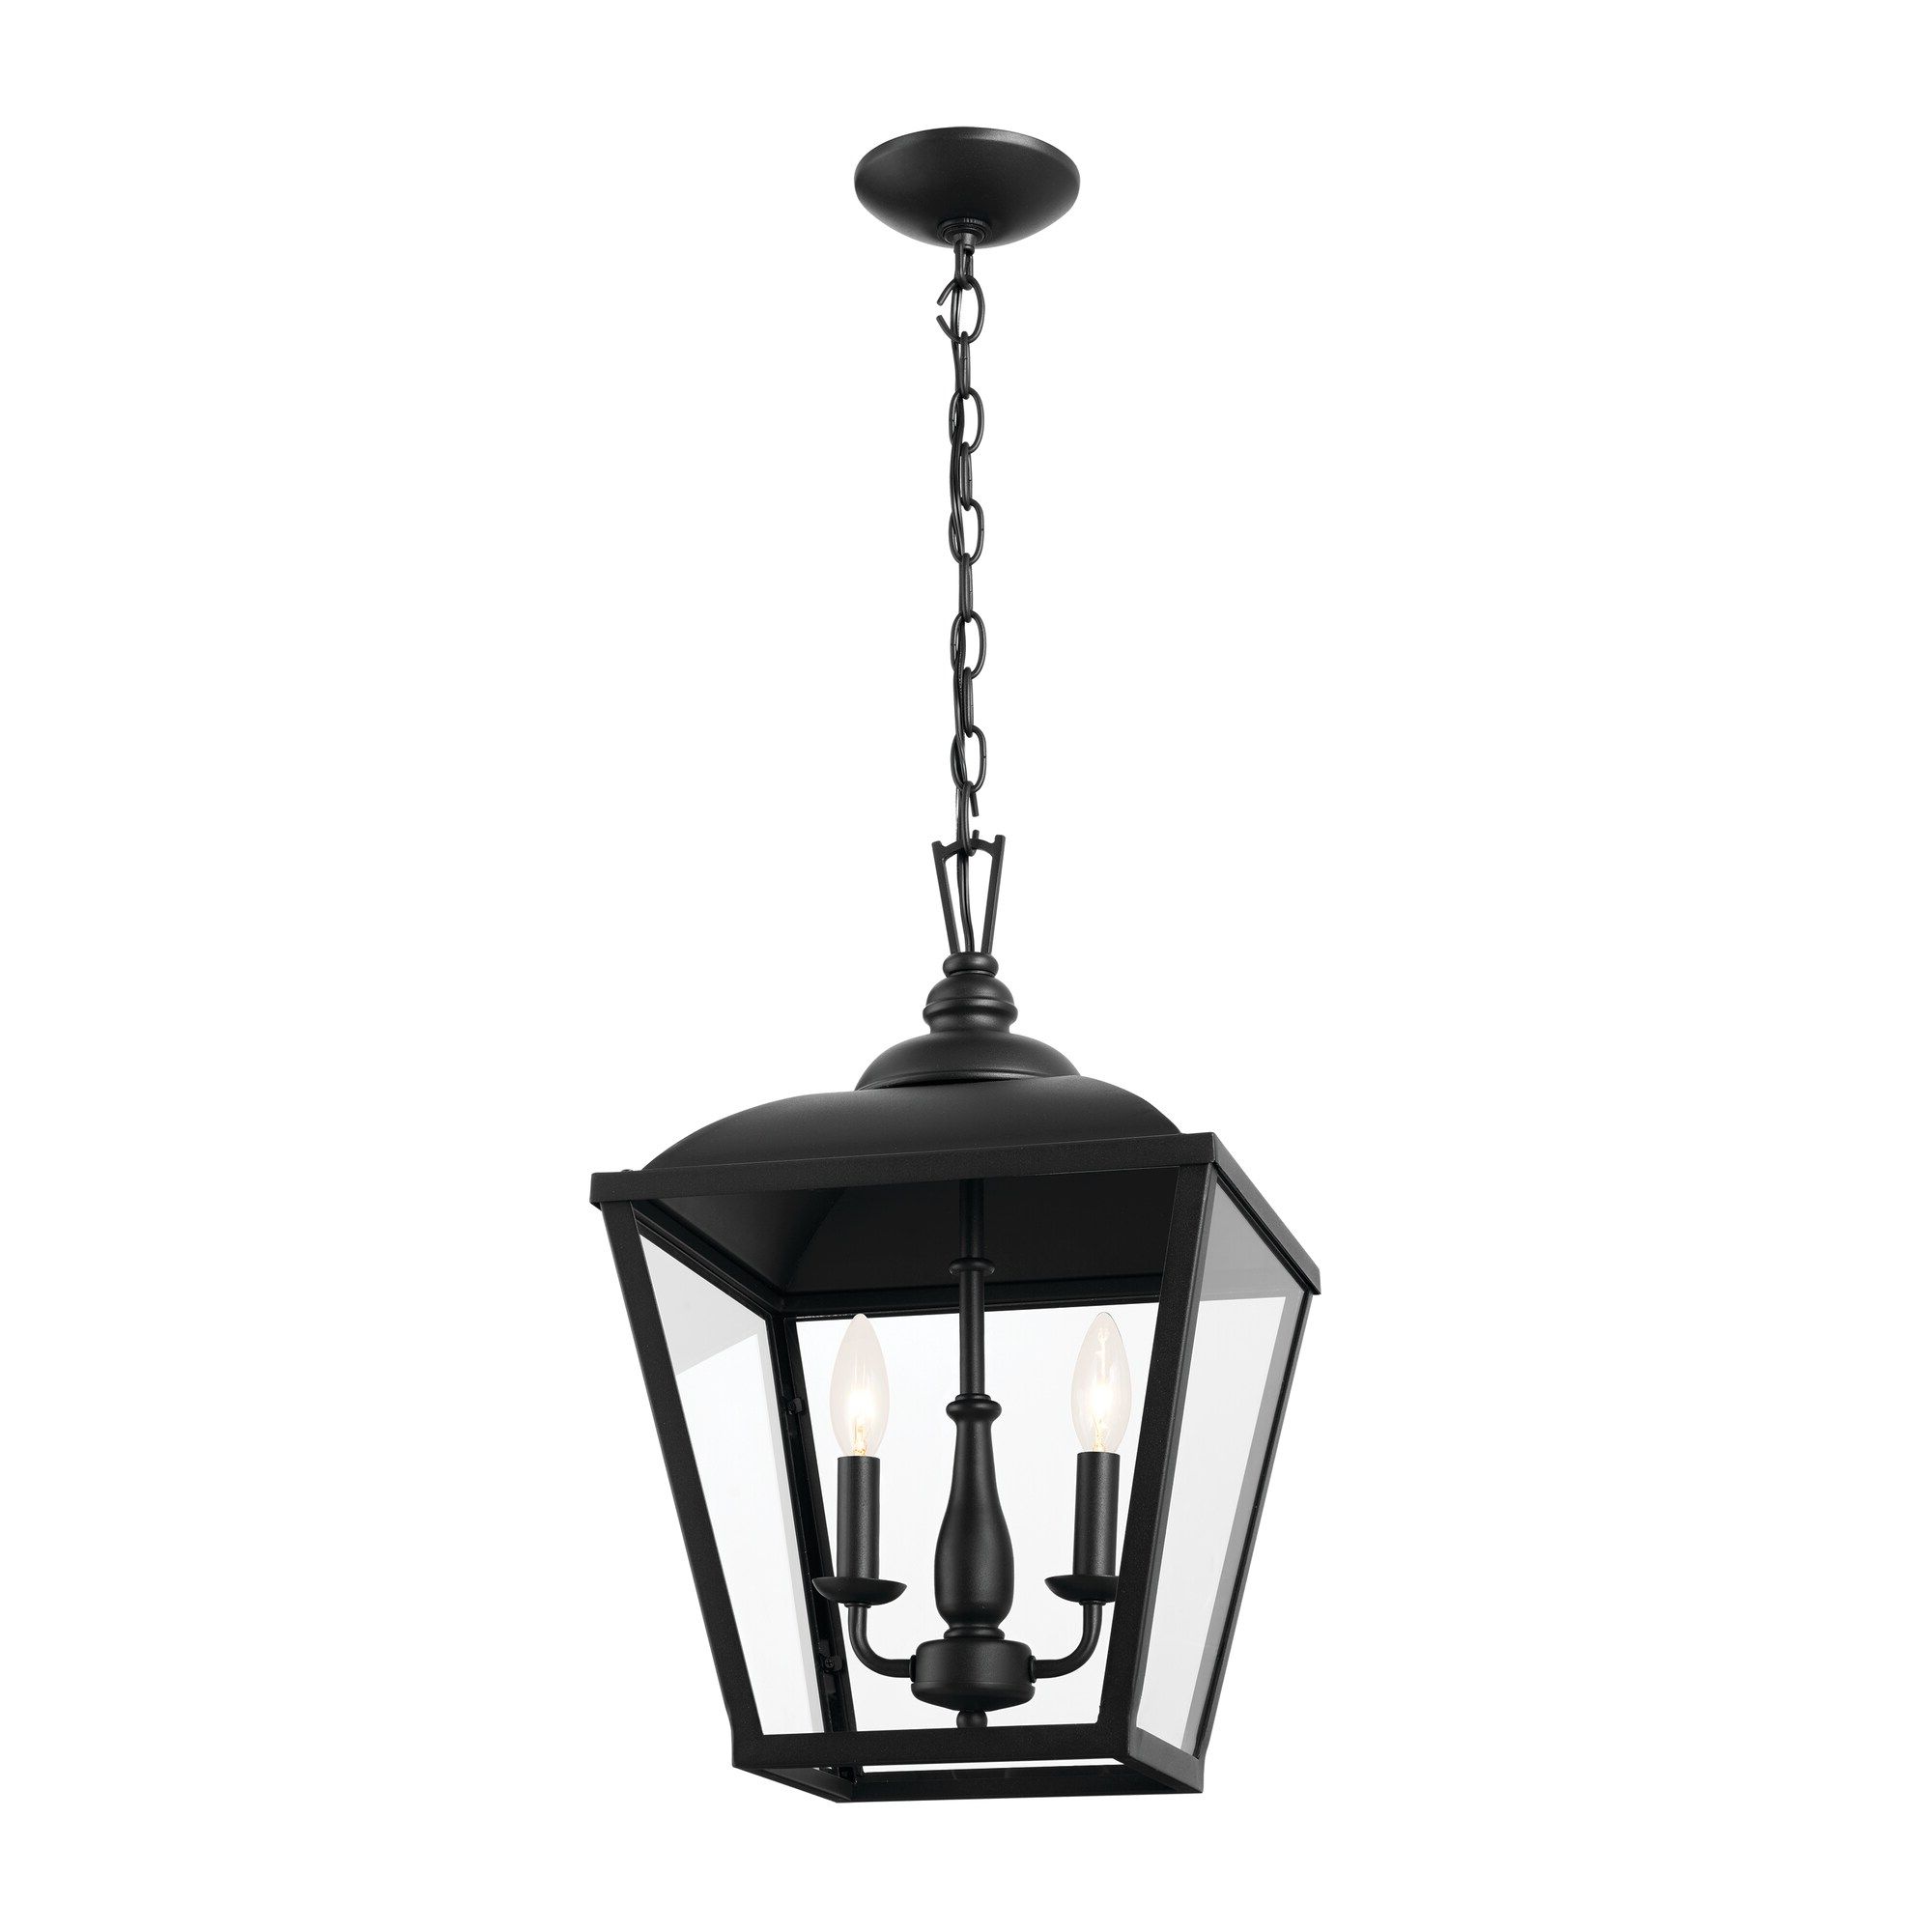 Popular Kichler Dame 3 Light Textured Black Farmhouse Clear Glass Lantern Pendant  Light In The Pendant Lighting Department At Lowes Intended For Textured Black Lantern Chandeliers (View 4 of 15)